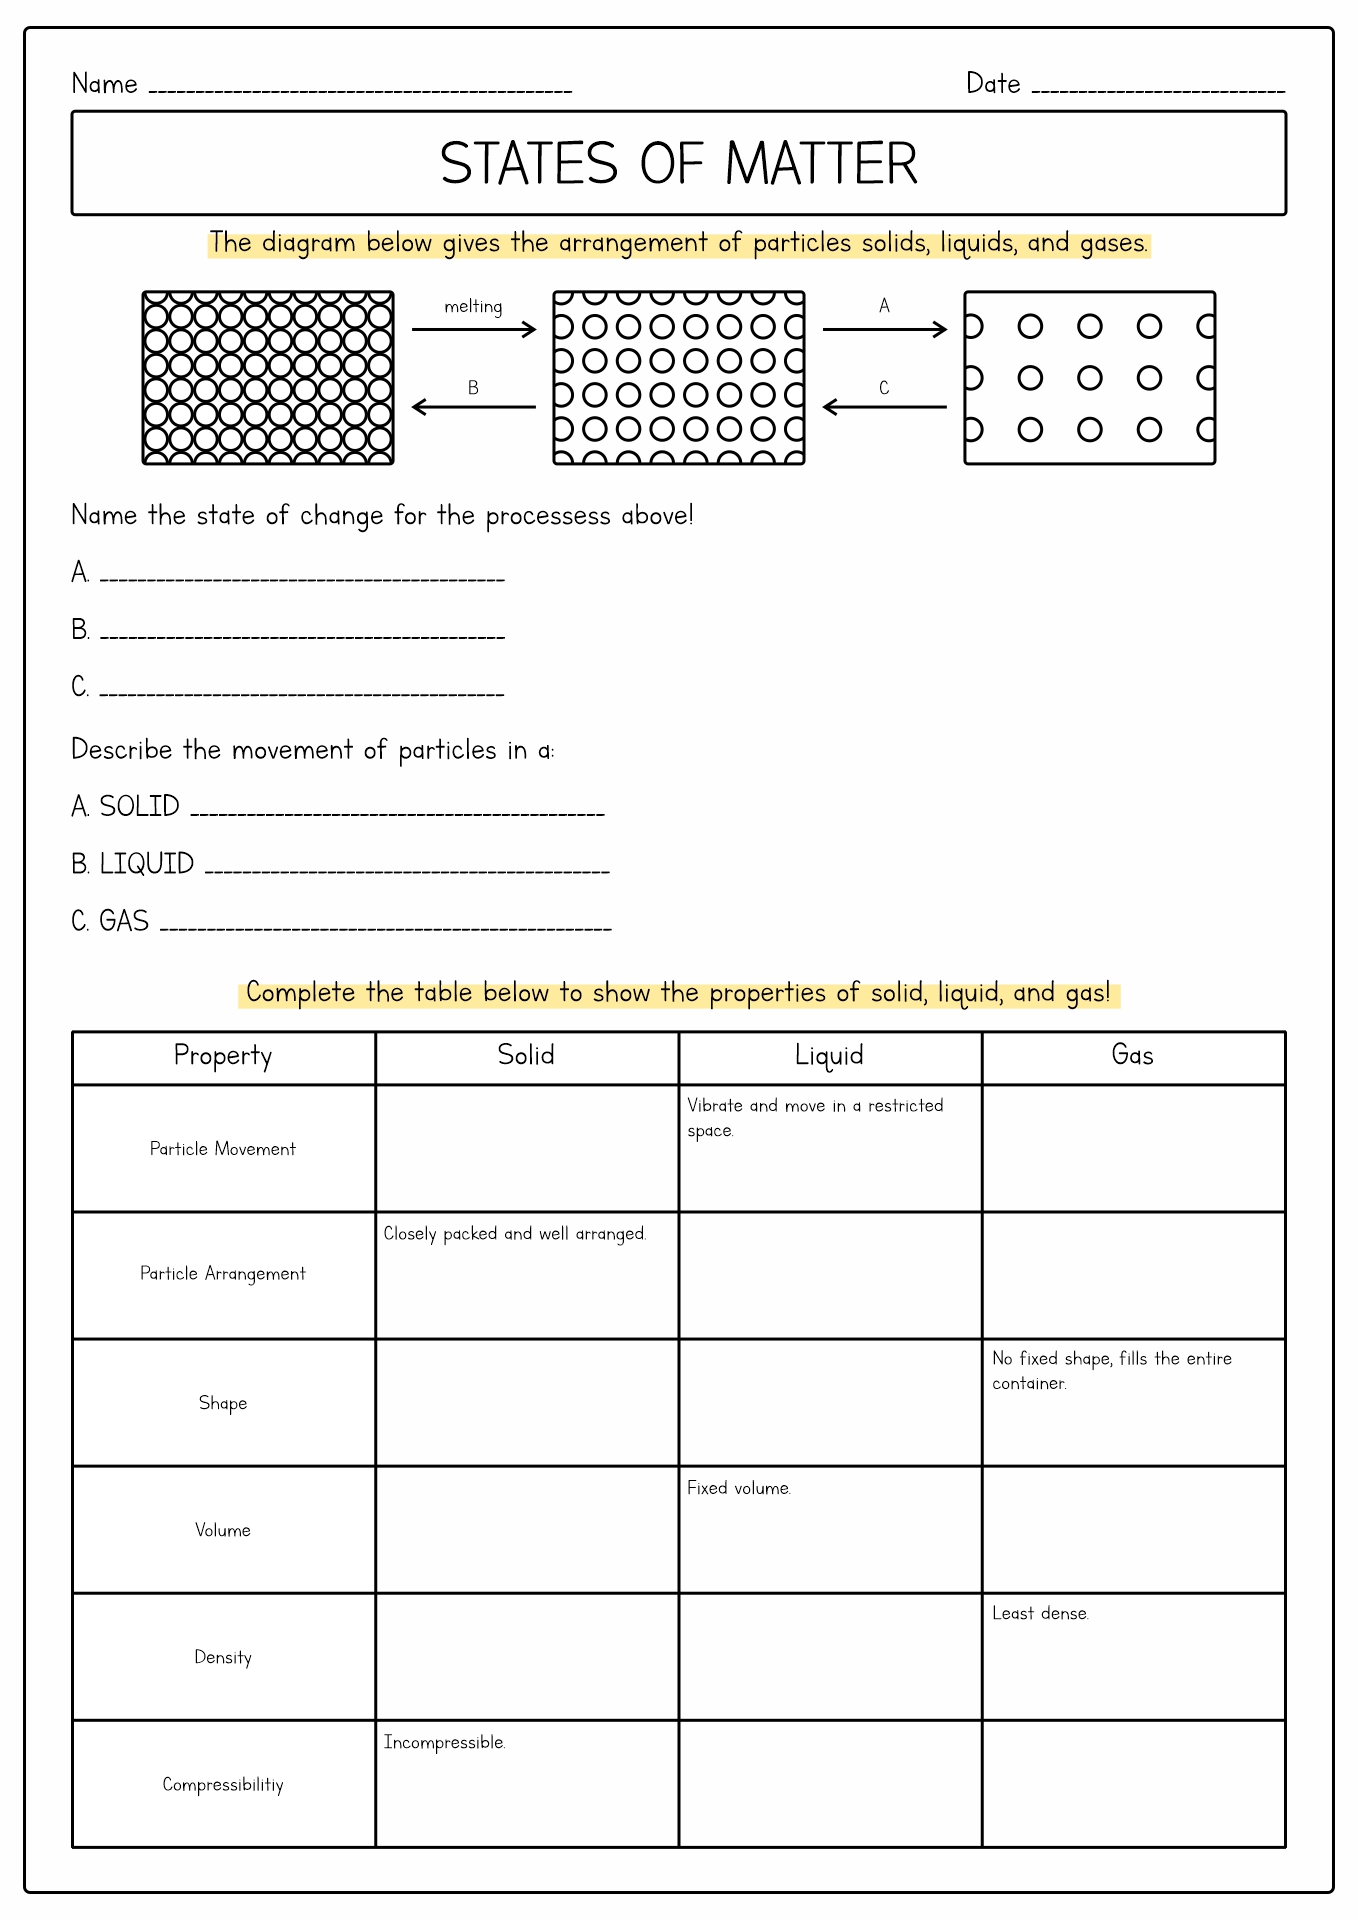 19 Best Images of Fun States Of Matter Worksheets - Physical Matter